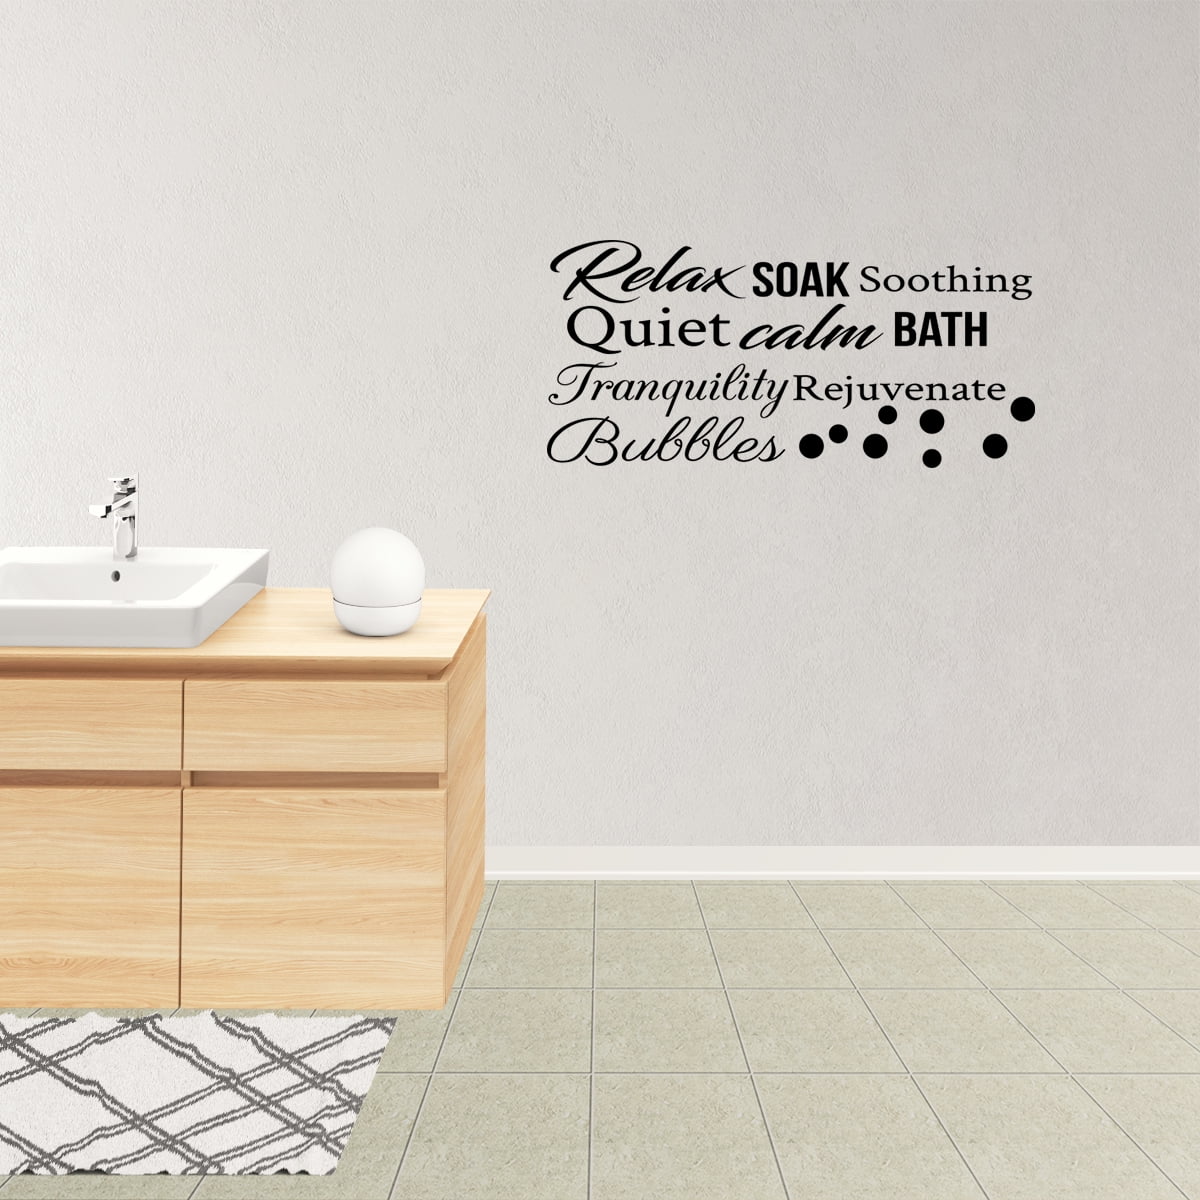 Wall Decal Quote Relax Soal Soothing Calm Tranquility ...